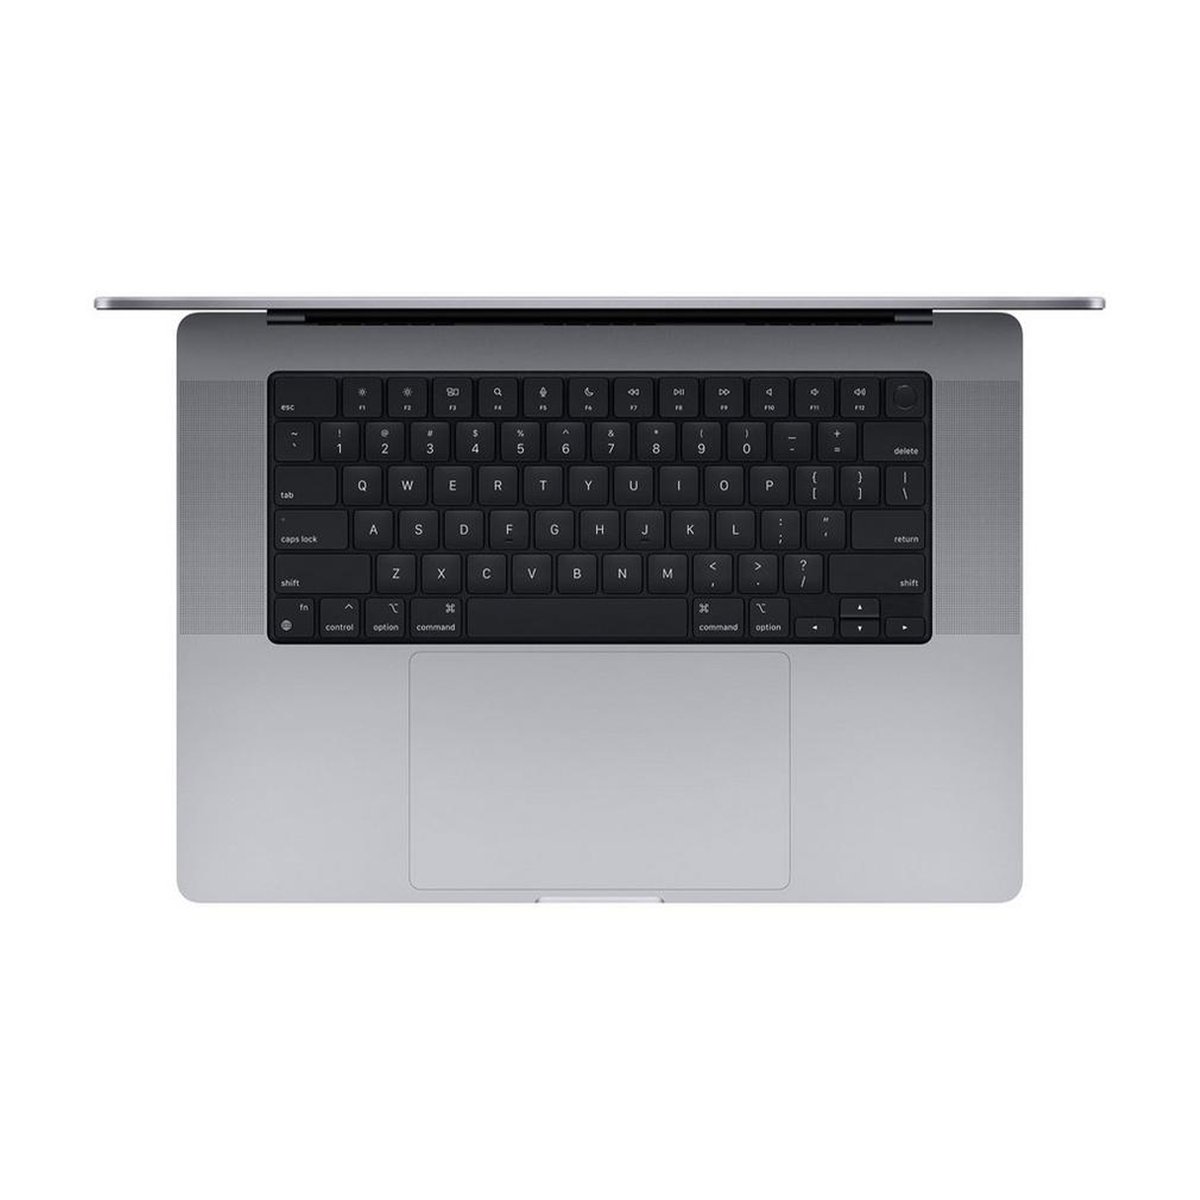 Apple 16-inch MacBook Pro: Apple M1 Pro chip with 10‑core CPU and 16‑core GPU, 512GB SSD - Space Grey English Keyboard